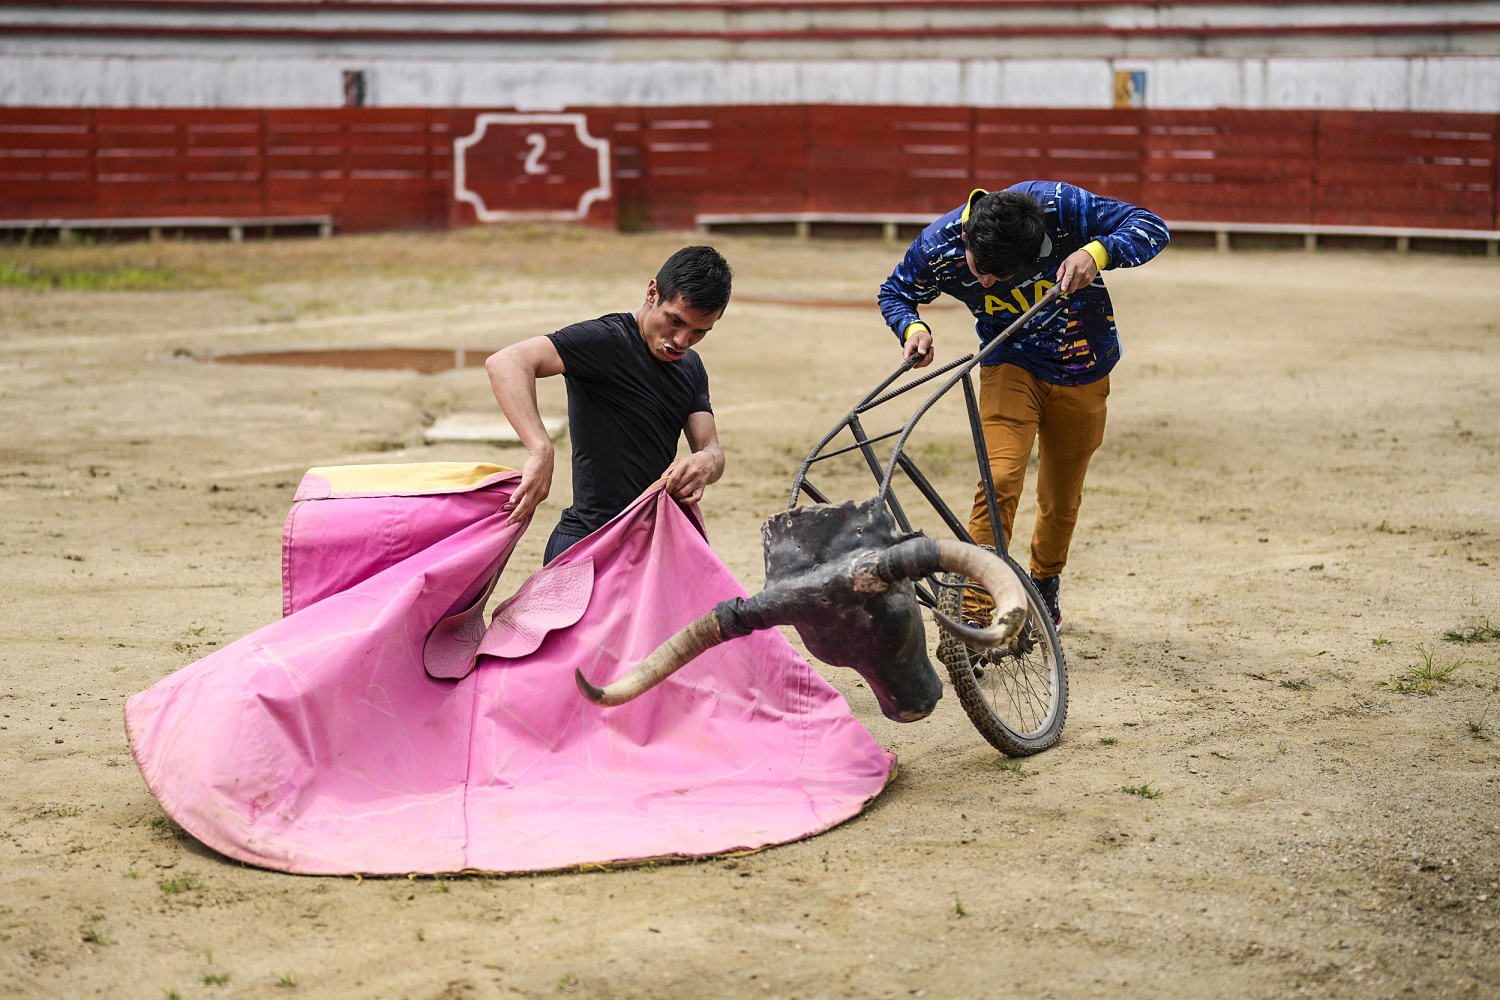 Colombian bullfighters opposed to new ban say they'll keep at it